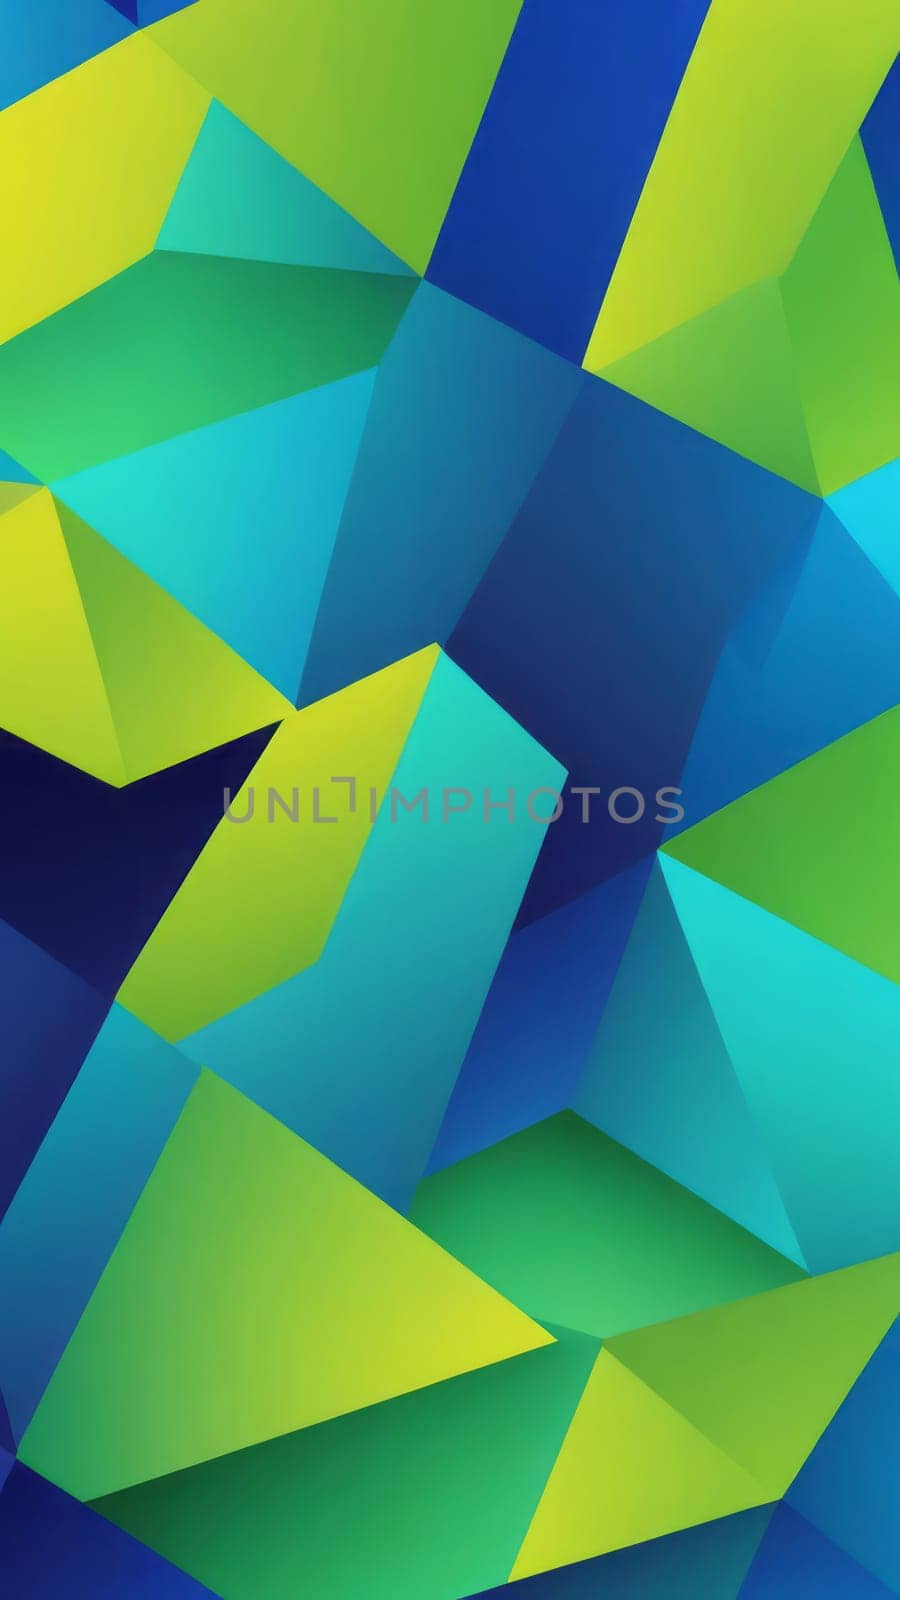 Creativity in paints from Geometric shapes and lime by nkotlyar